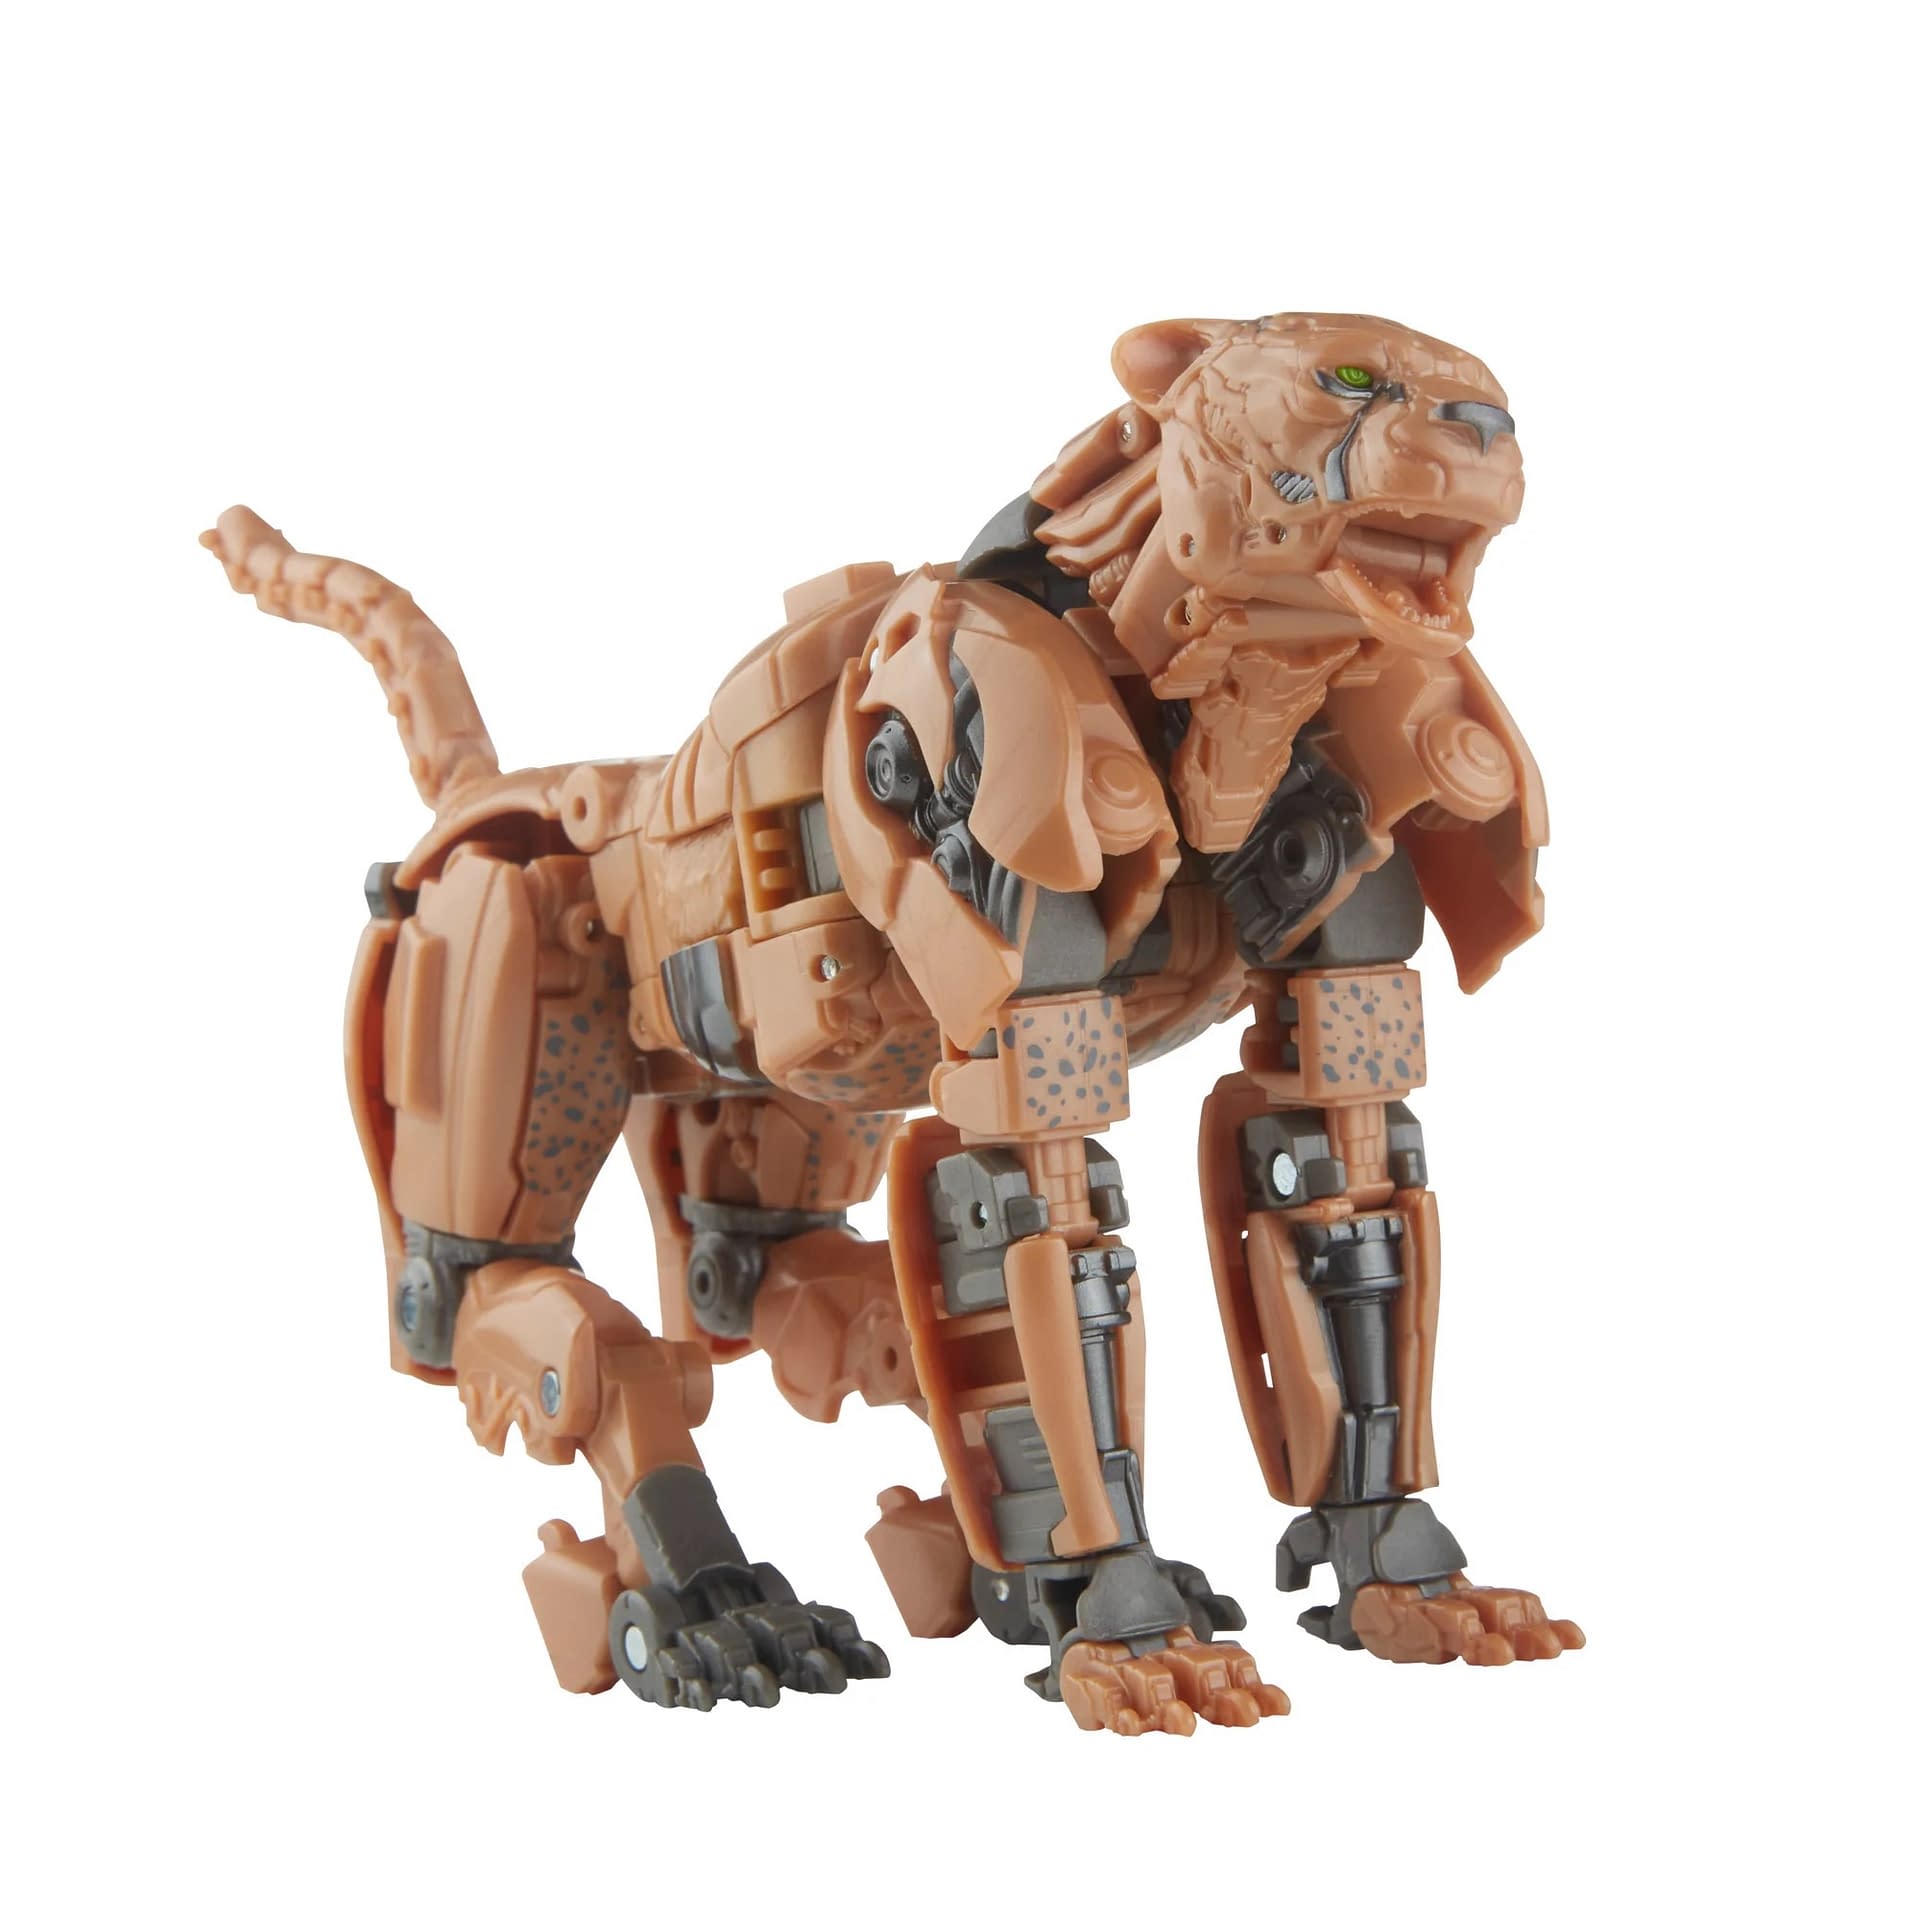 Transformers: Rise of the Beasts Cheetor Figure Arrives from Hasbro